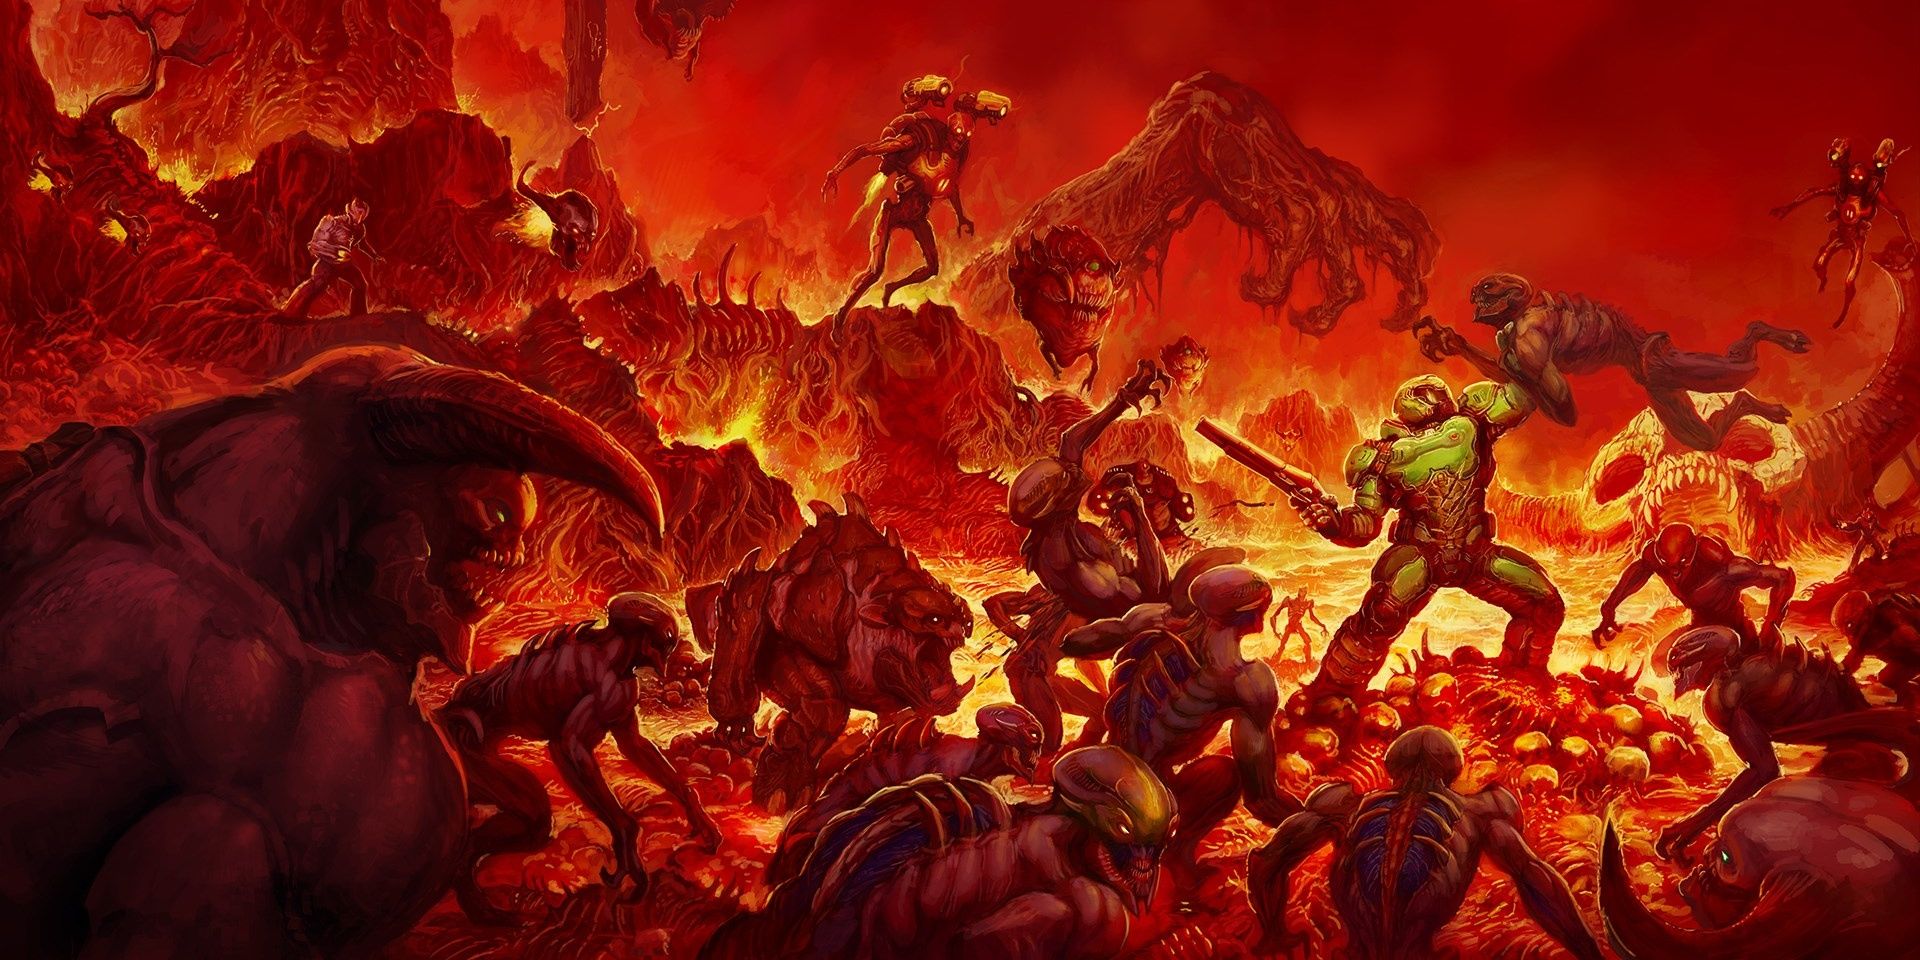 Best Motion Games Switch - Doom (2016) - An Army Of Demons Attacking The Protagonist In A Nightmarish Landscape